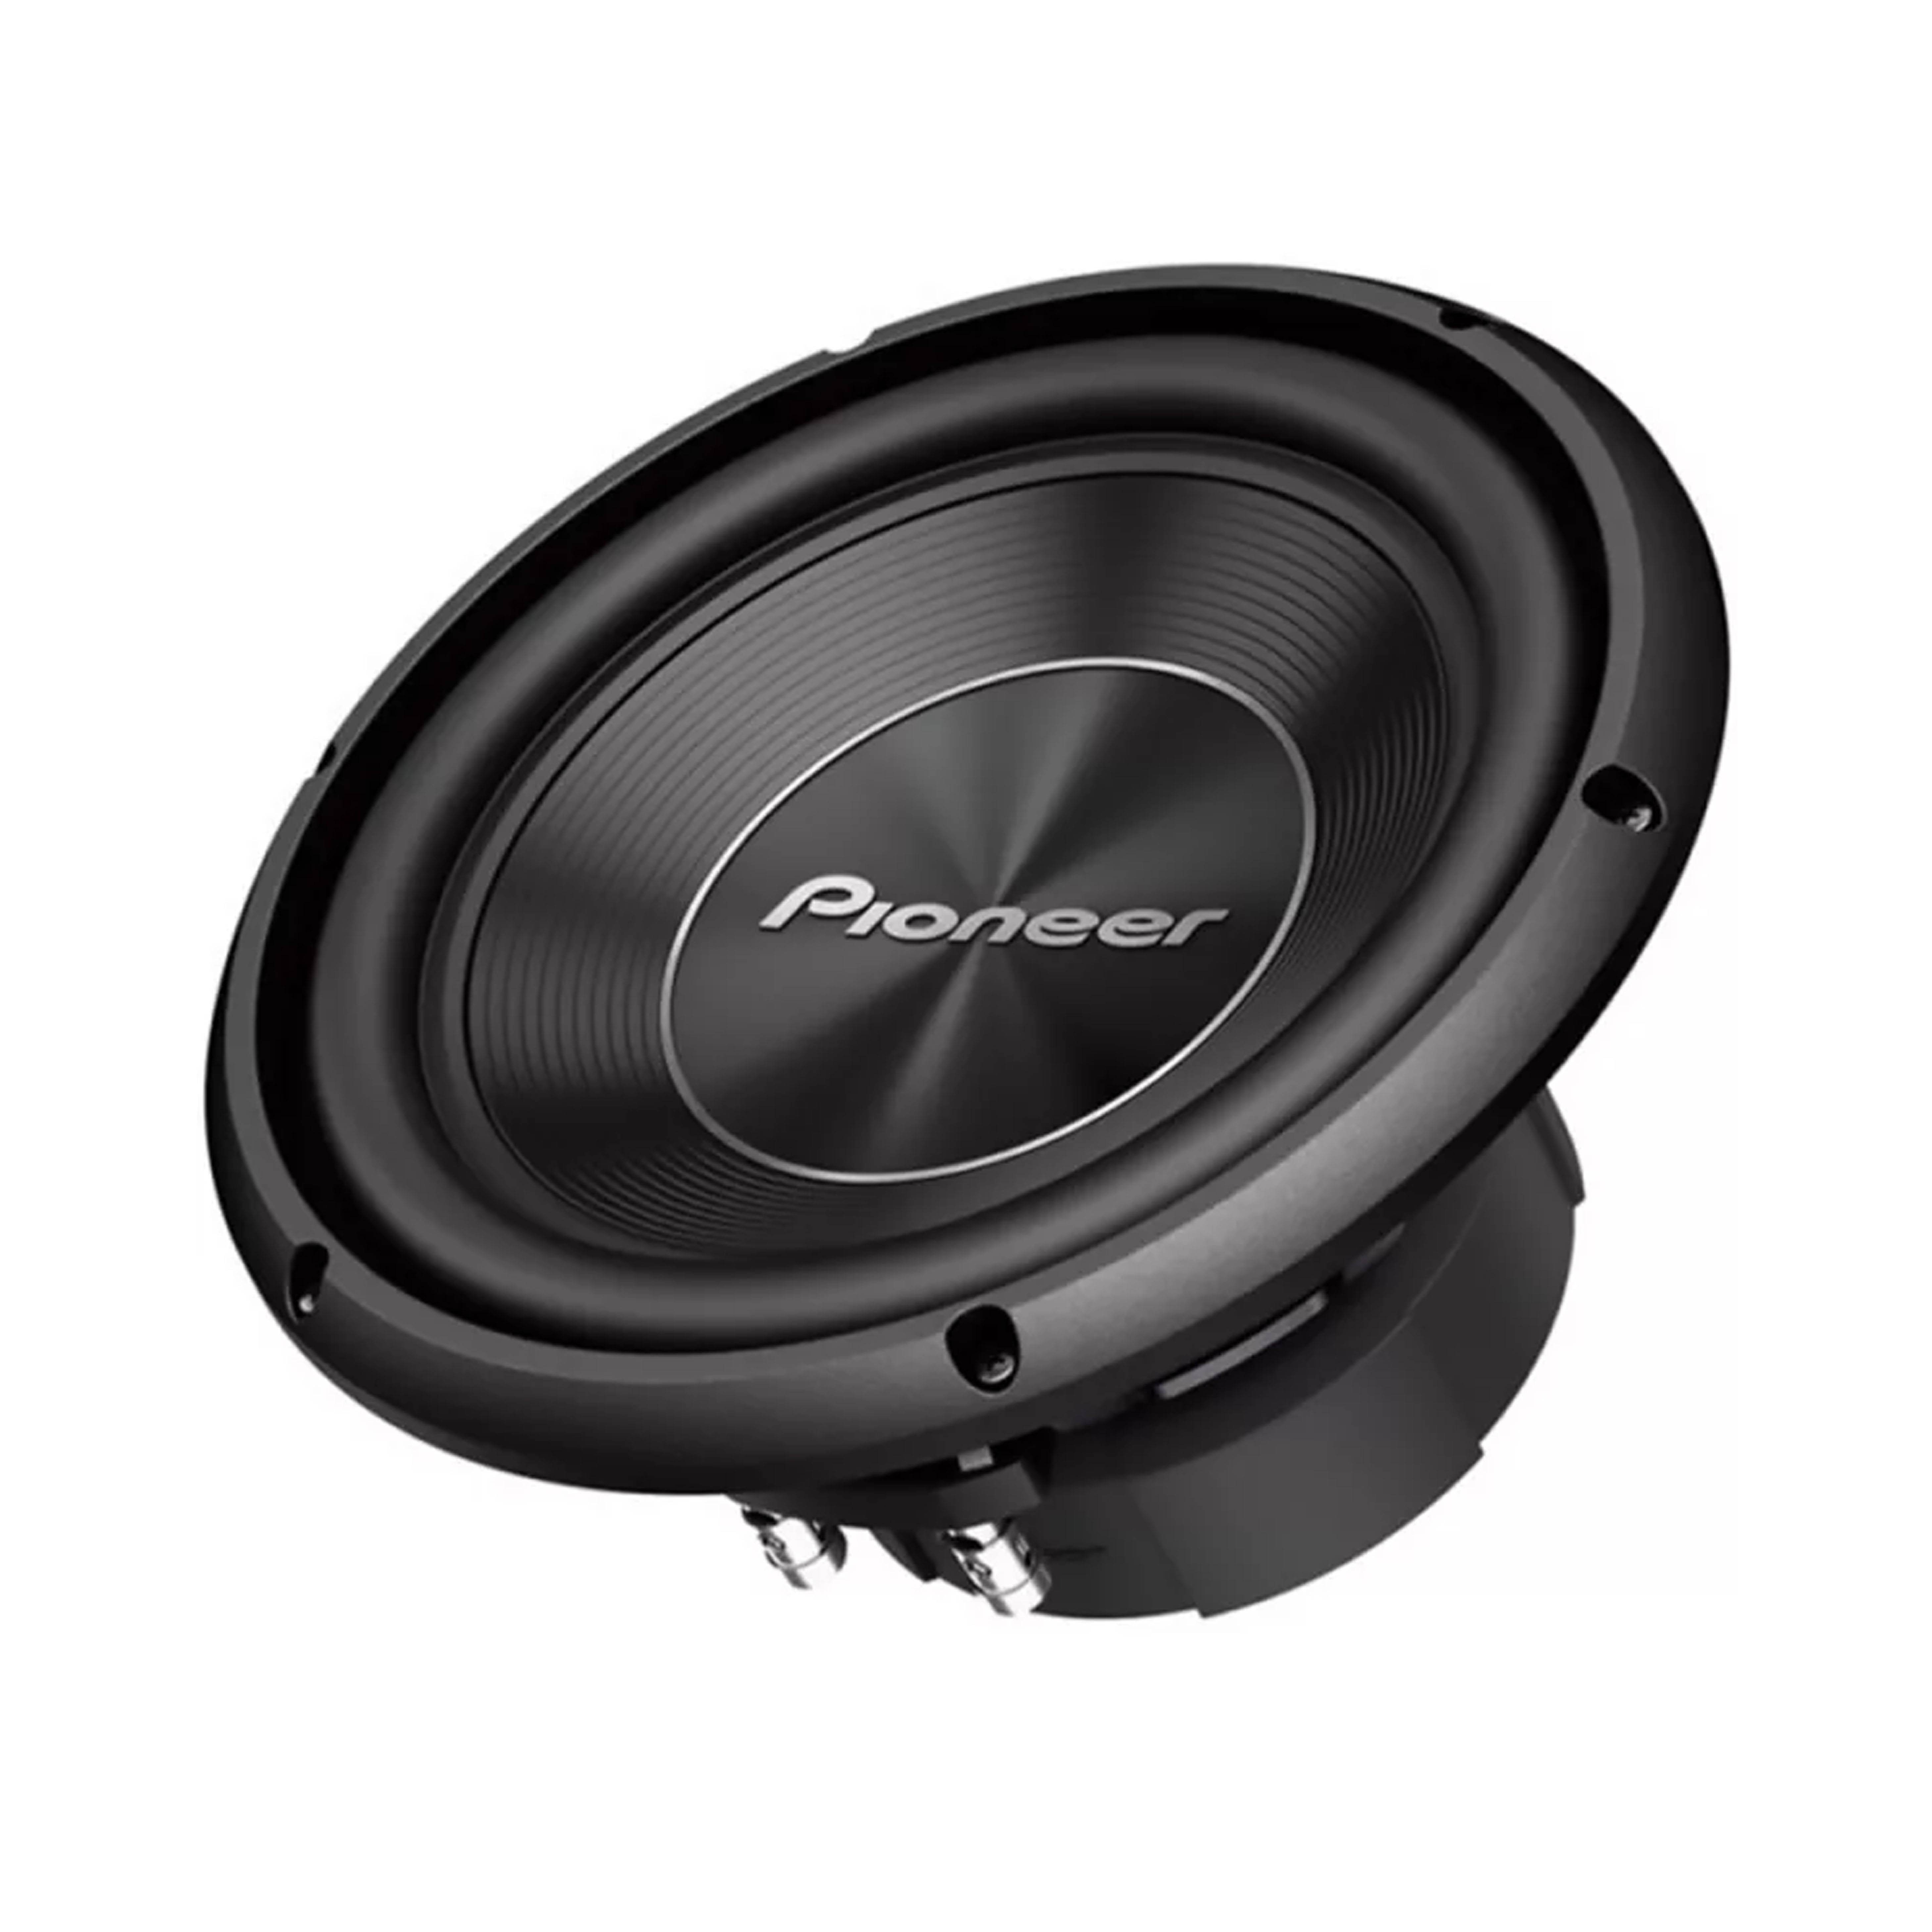 SUBWOOFER PIONEER TS-A250S4 1300W